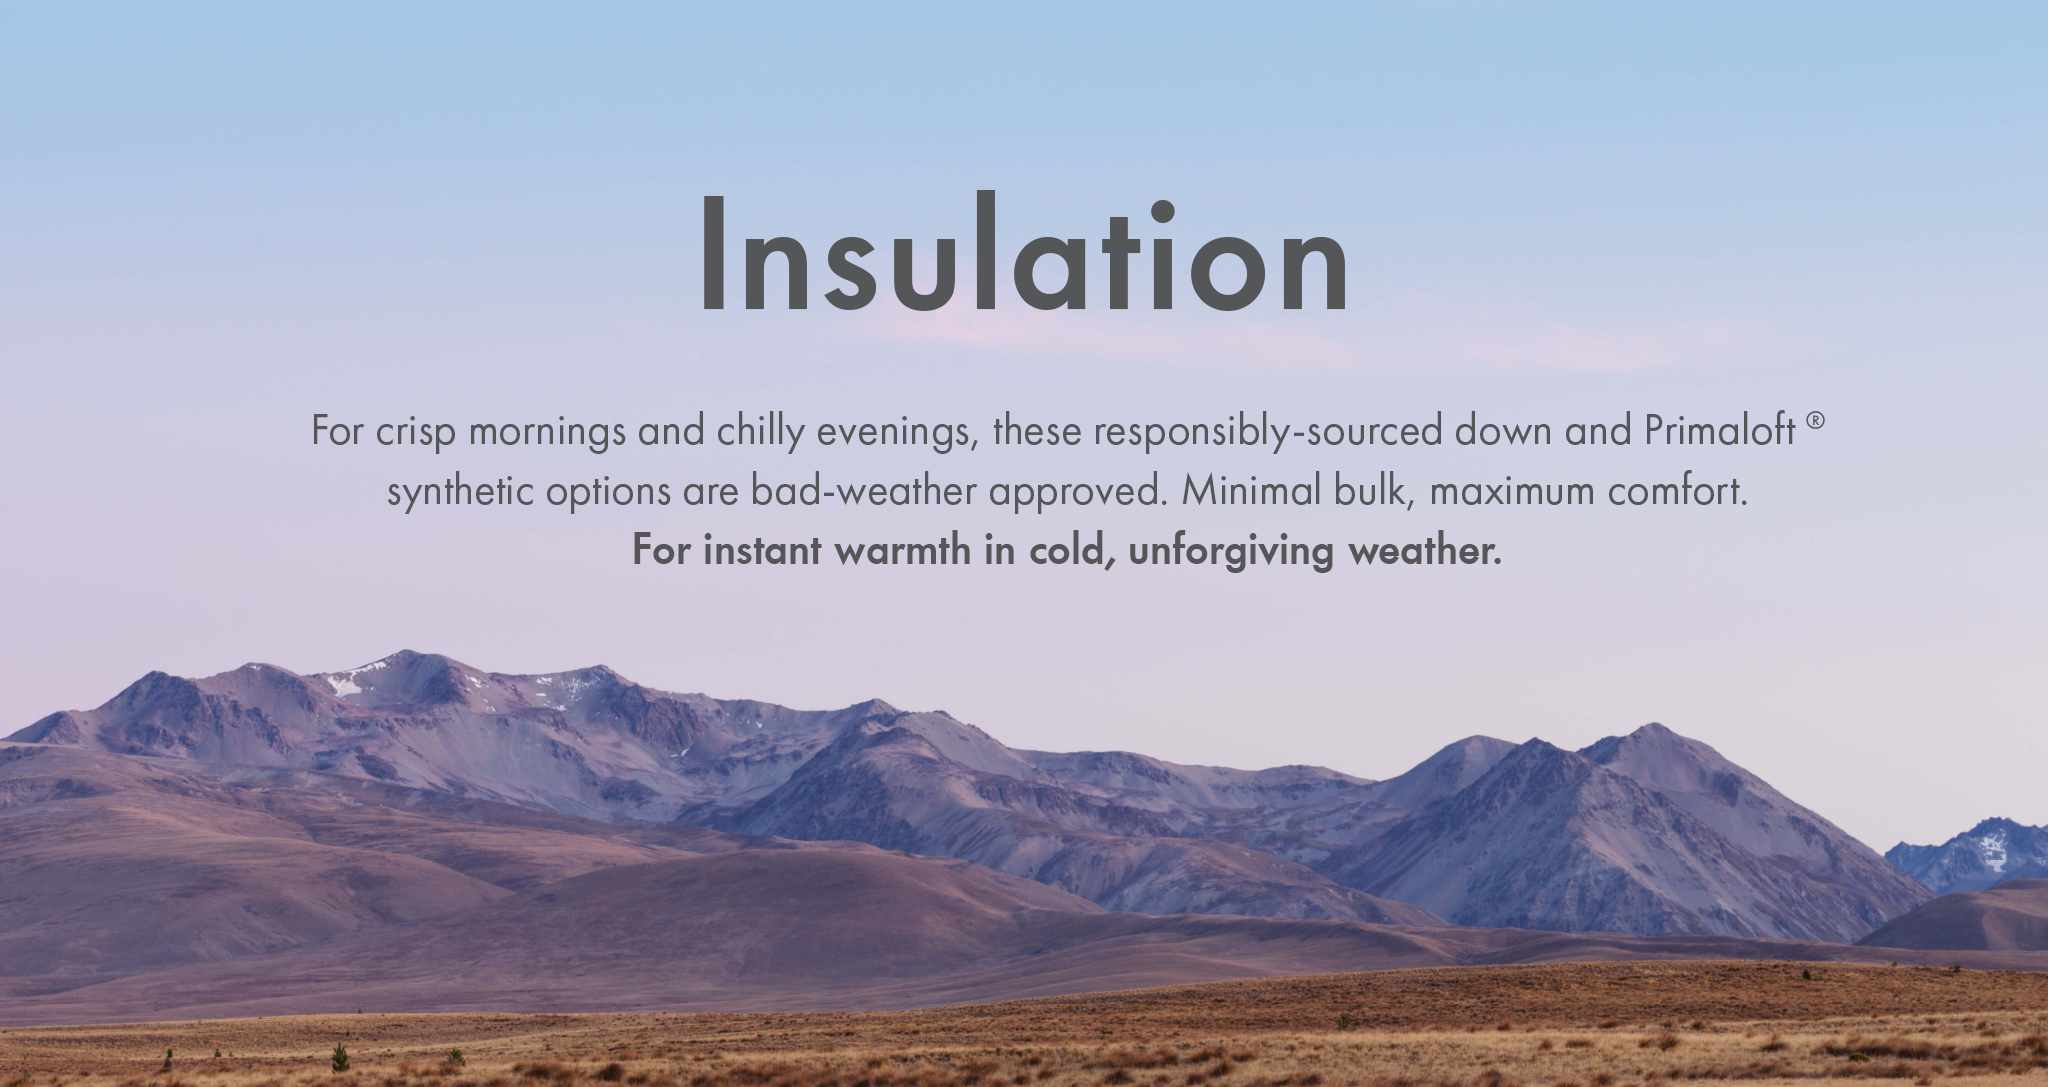 Insulation - For crisp mornings and chilly evenings, these responsibly-sourced down and Primaloft
synthetic options are bad-weather approved. Minimal bulk, maximum comfort.
For instant warmth in cold, unforgiving weather.